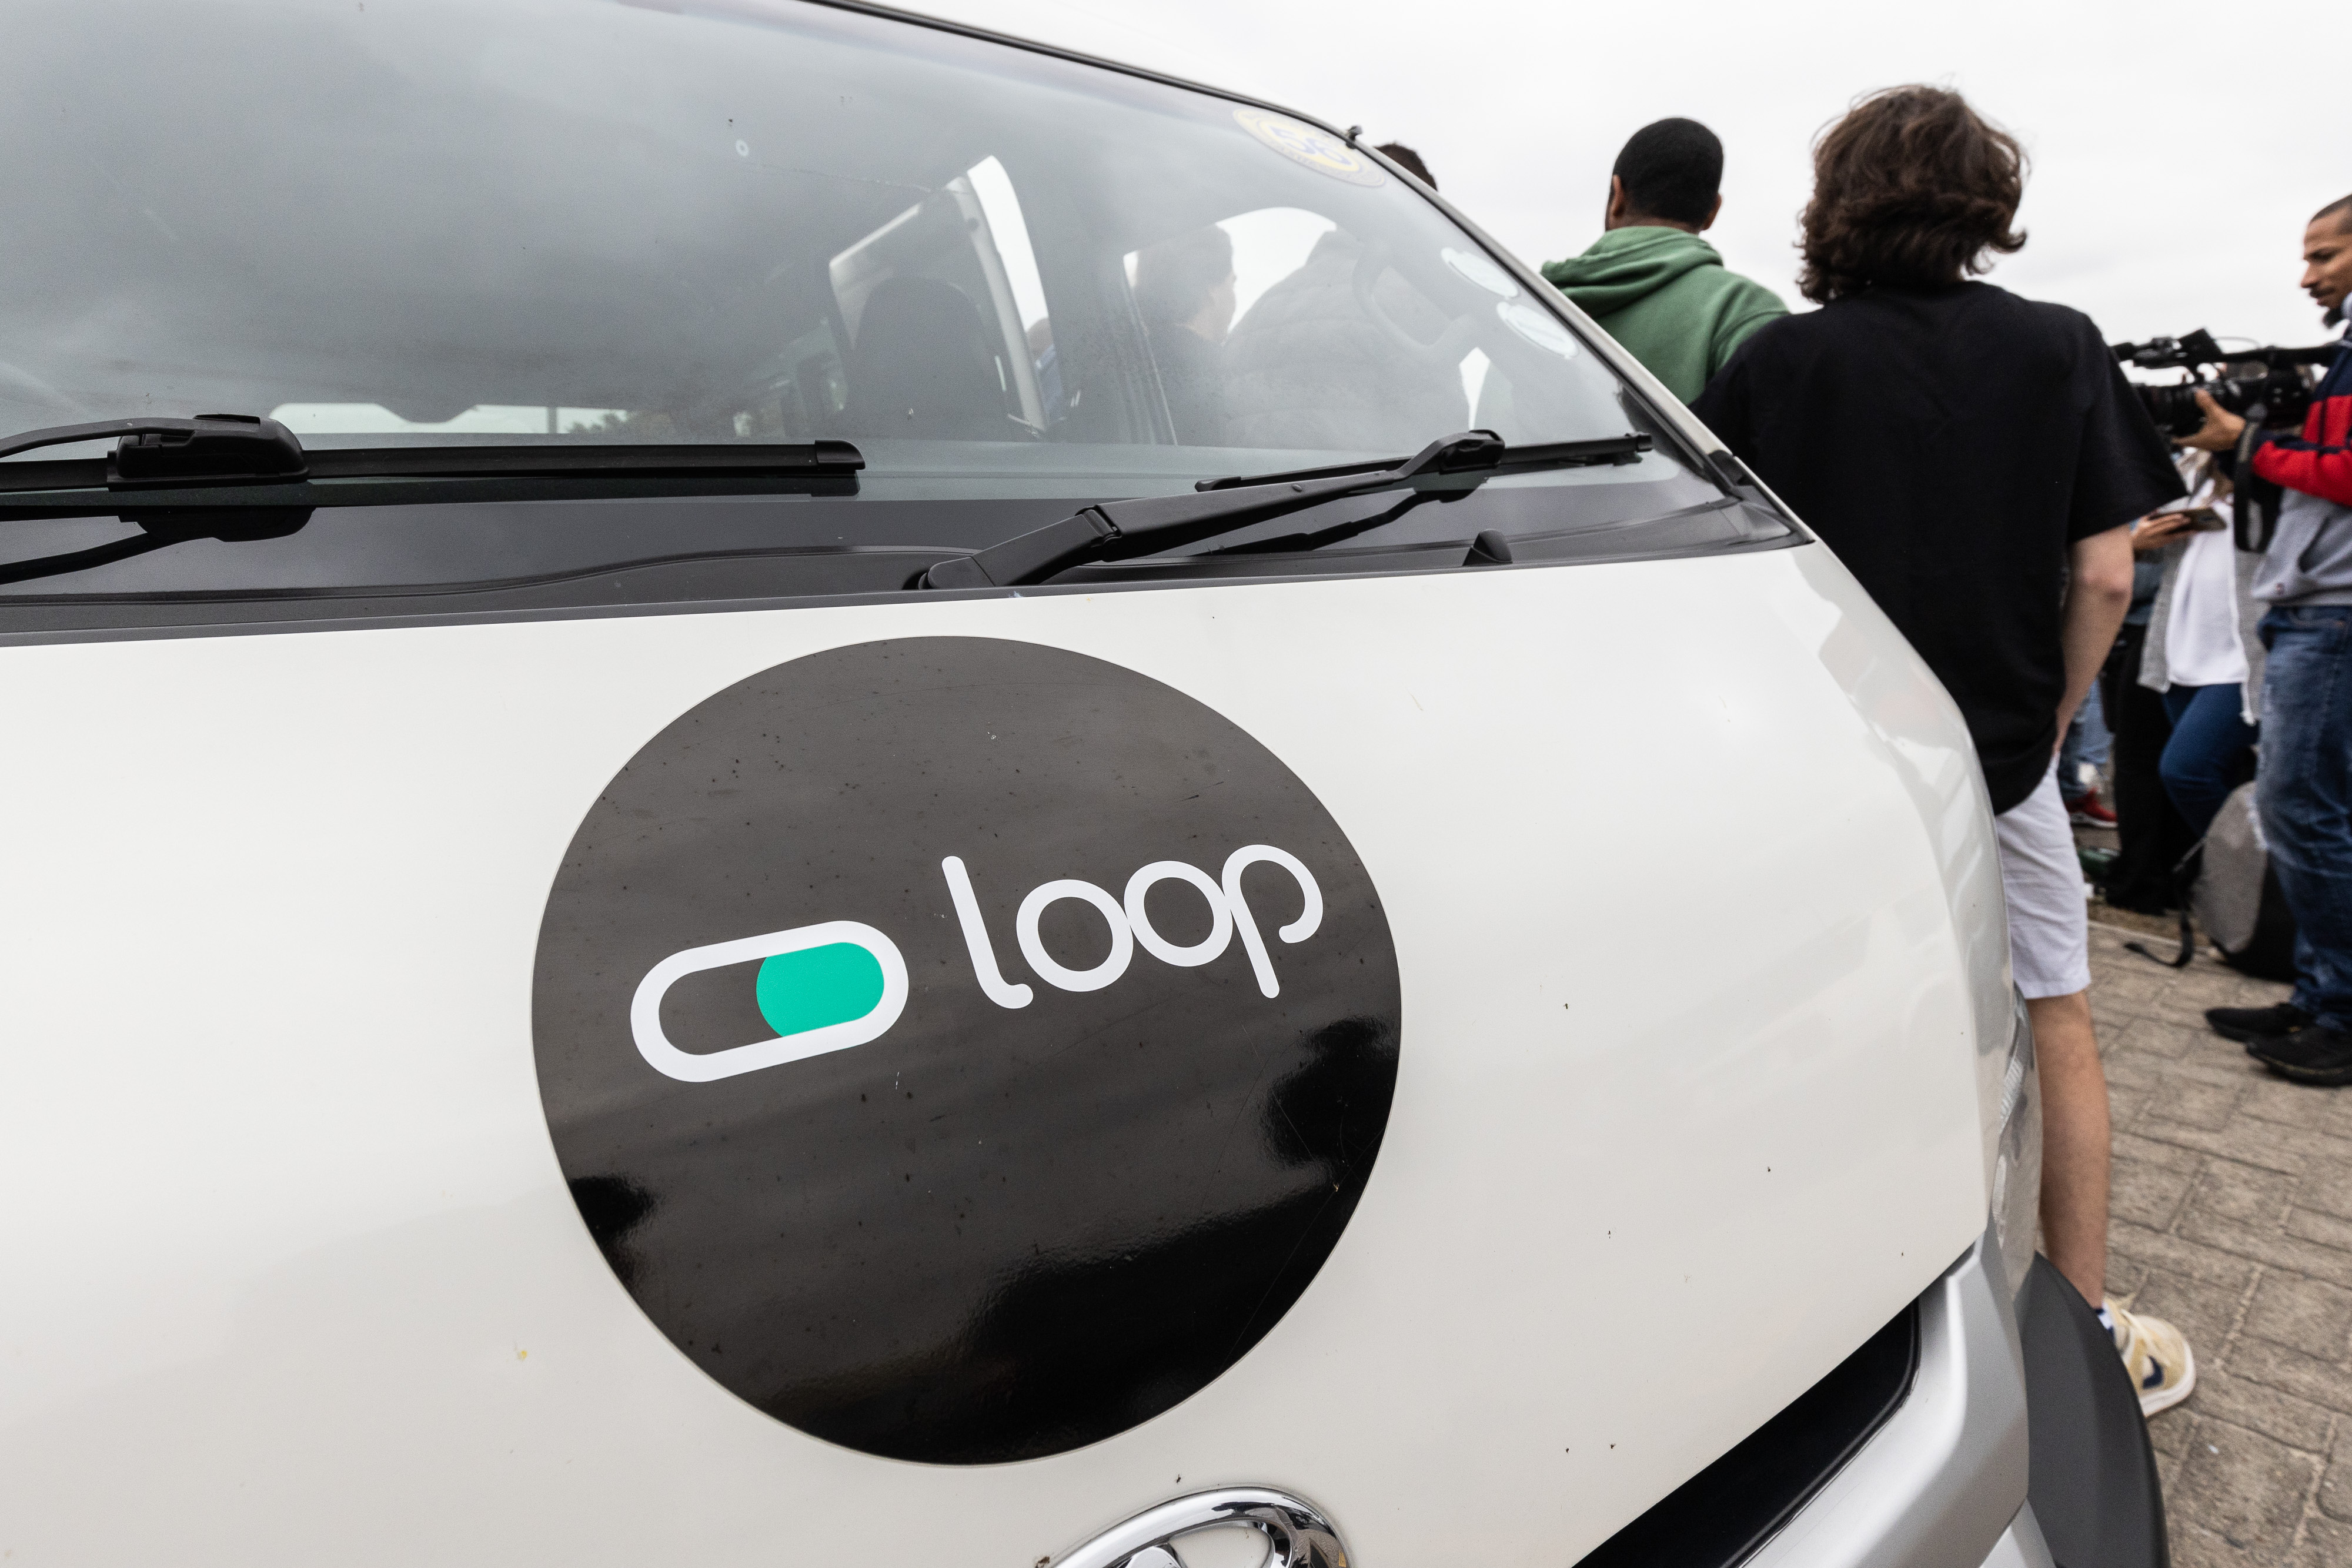 Loop signage on a minibus taxi